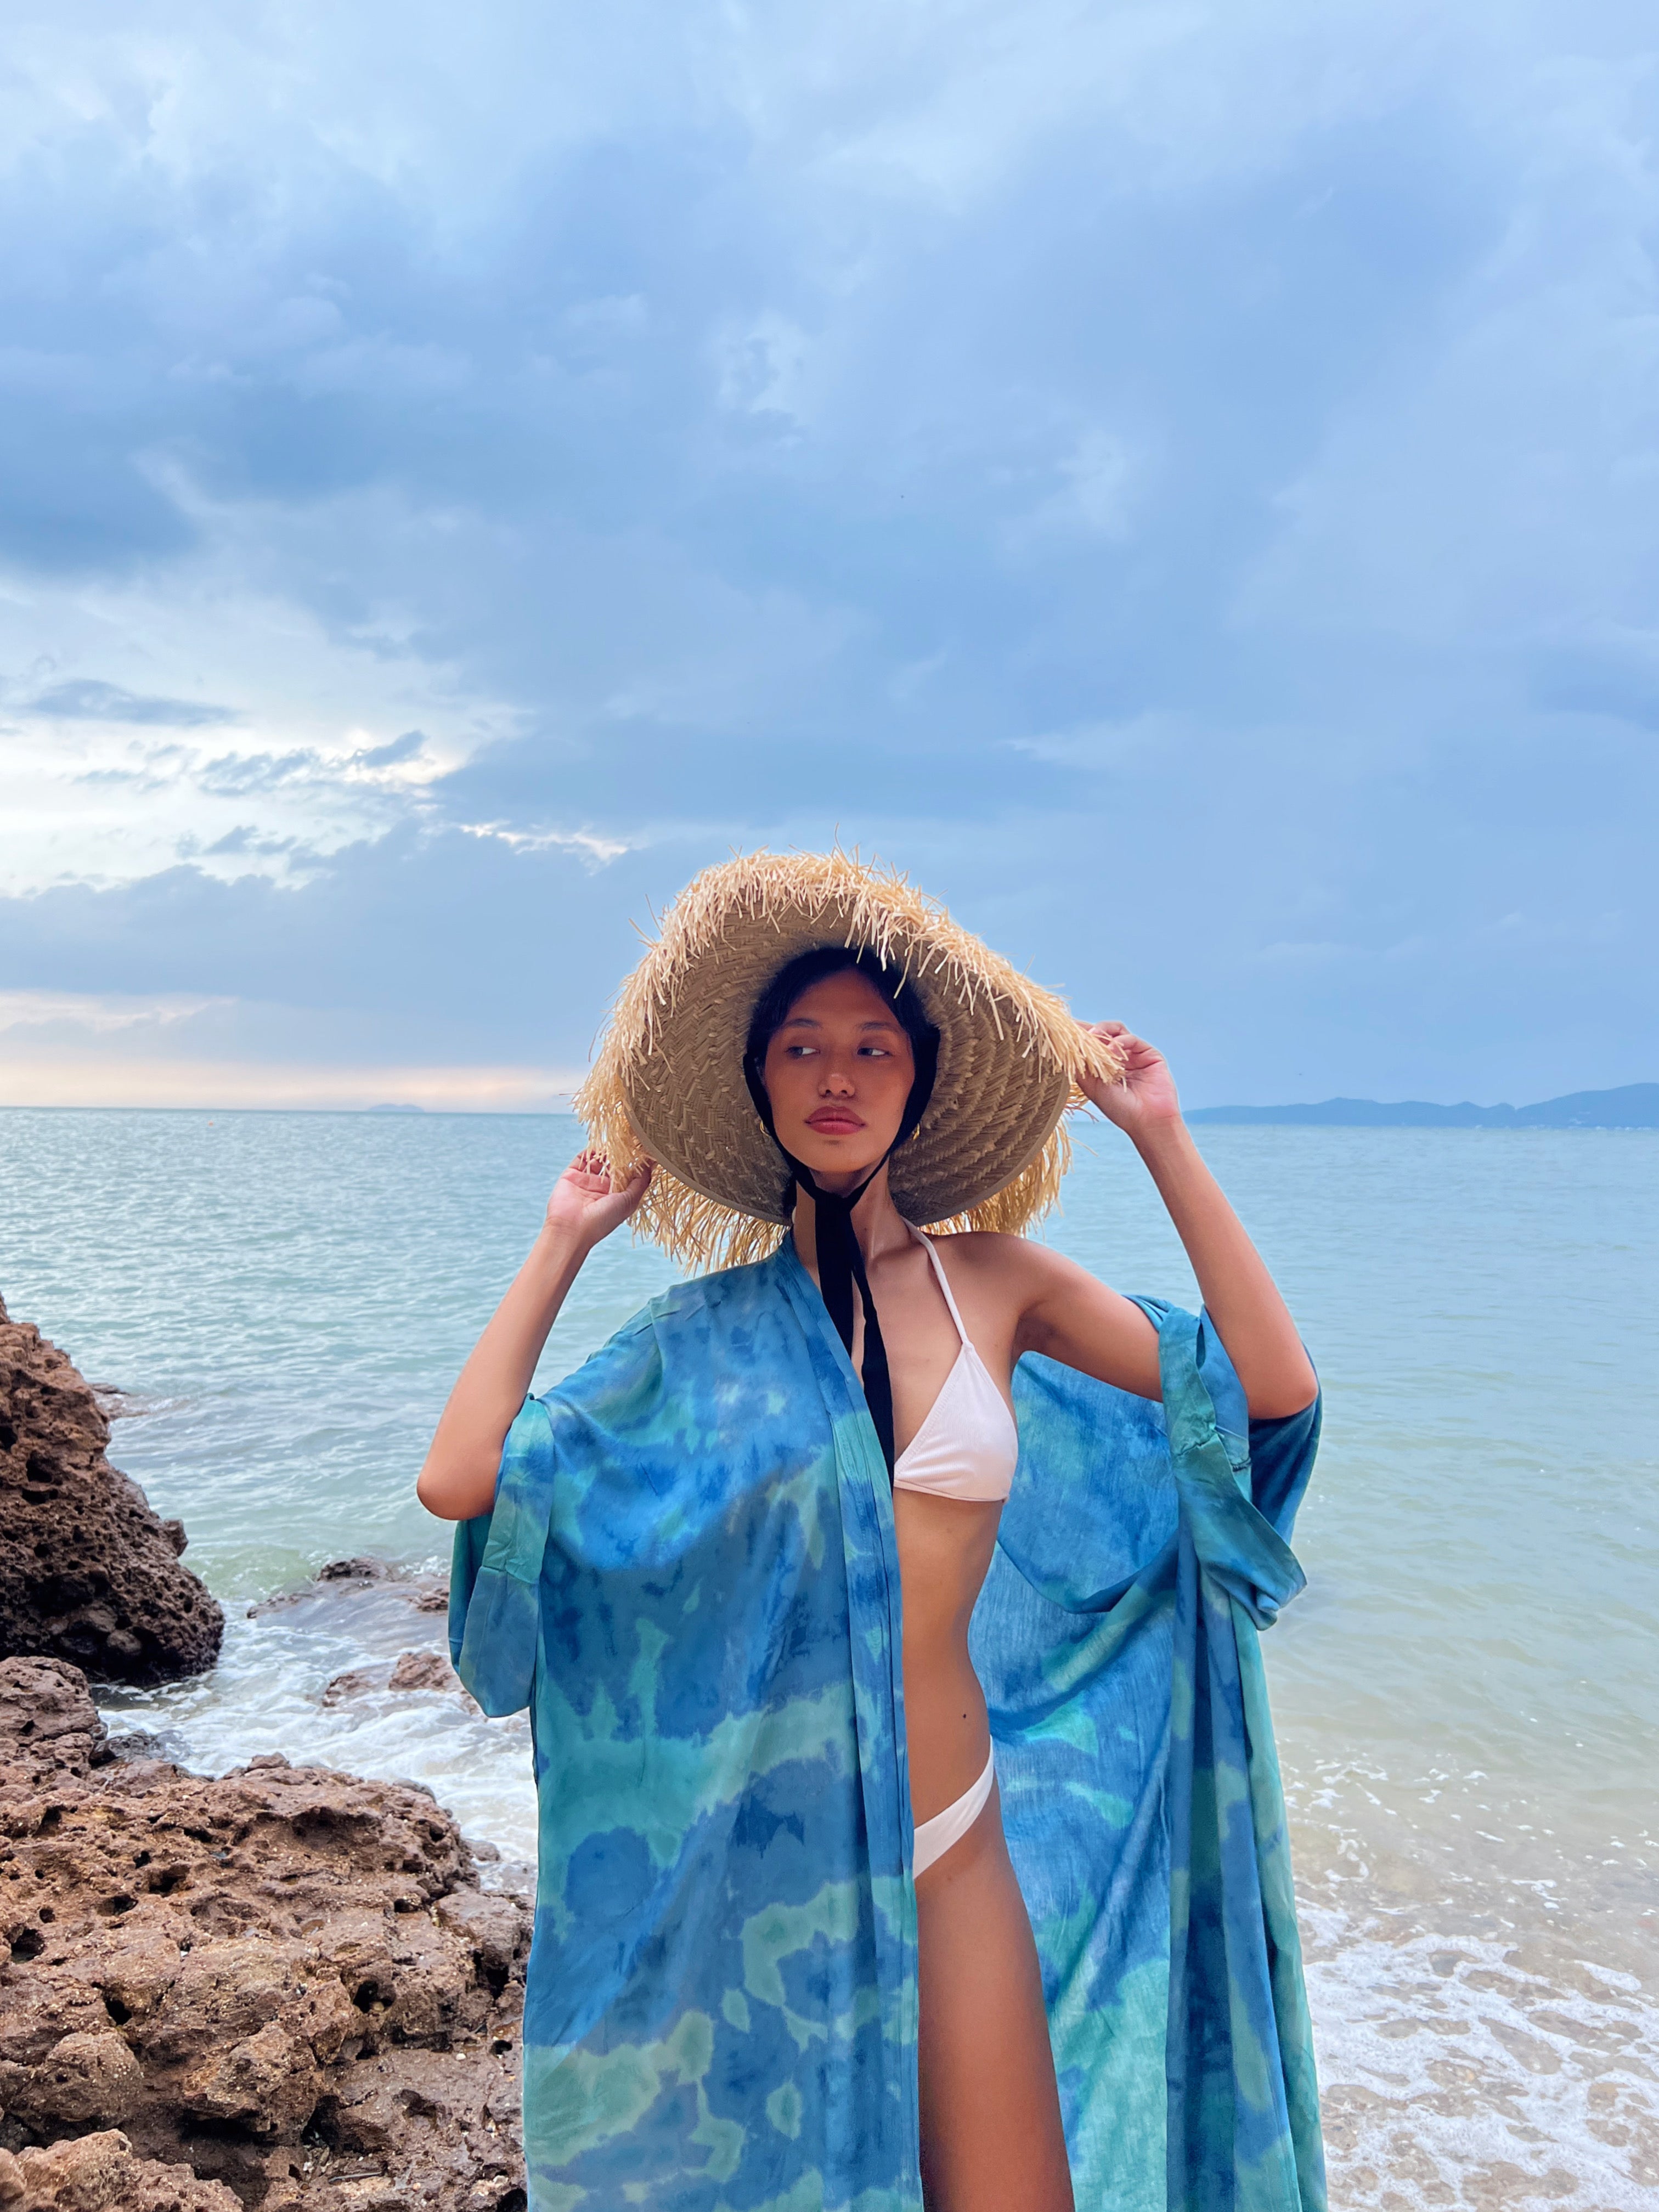 Shop Oversized Unisex Tie dye kimono robe in blue, boho beach coverup, perfect for vacation or everyday wear, this product is handmade with love by Coco de Chom.